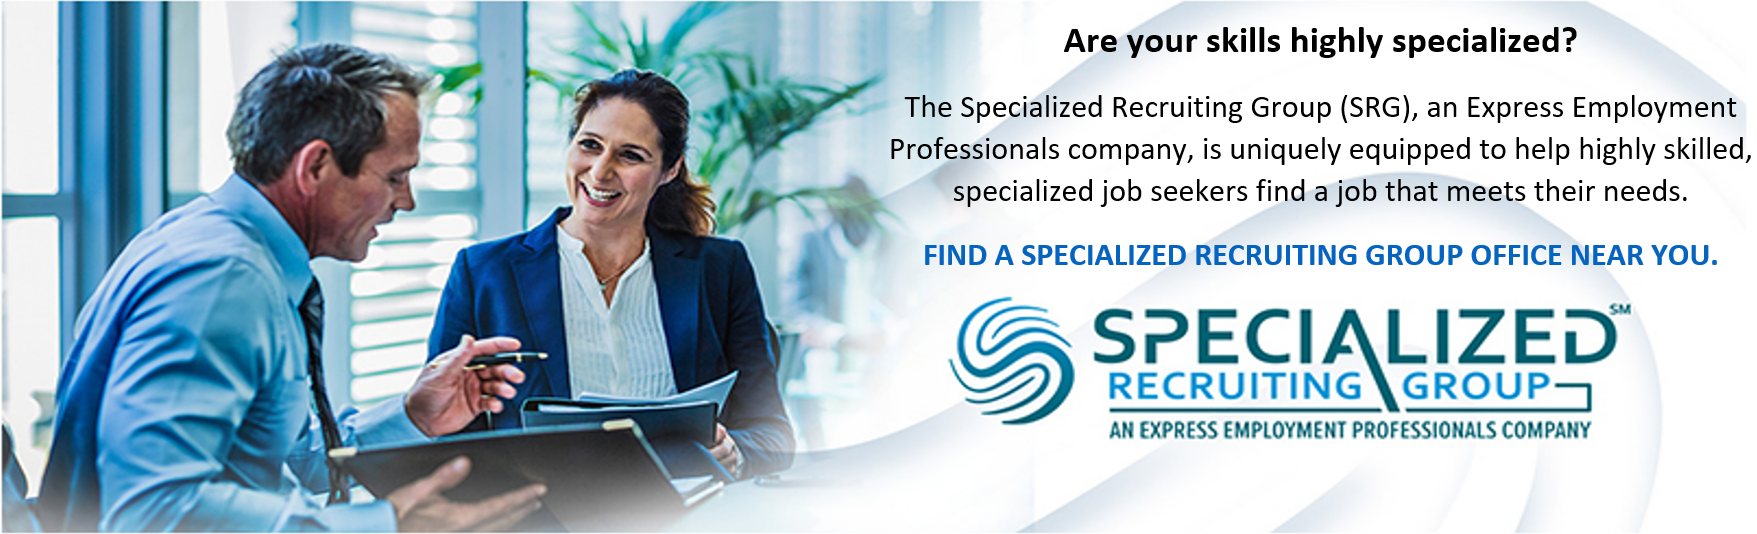 SRG-Are Your Skills HIghly Specialized-Prof Job Seekers